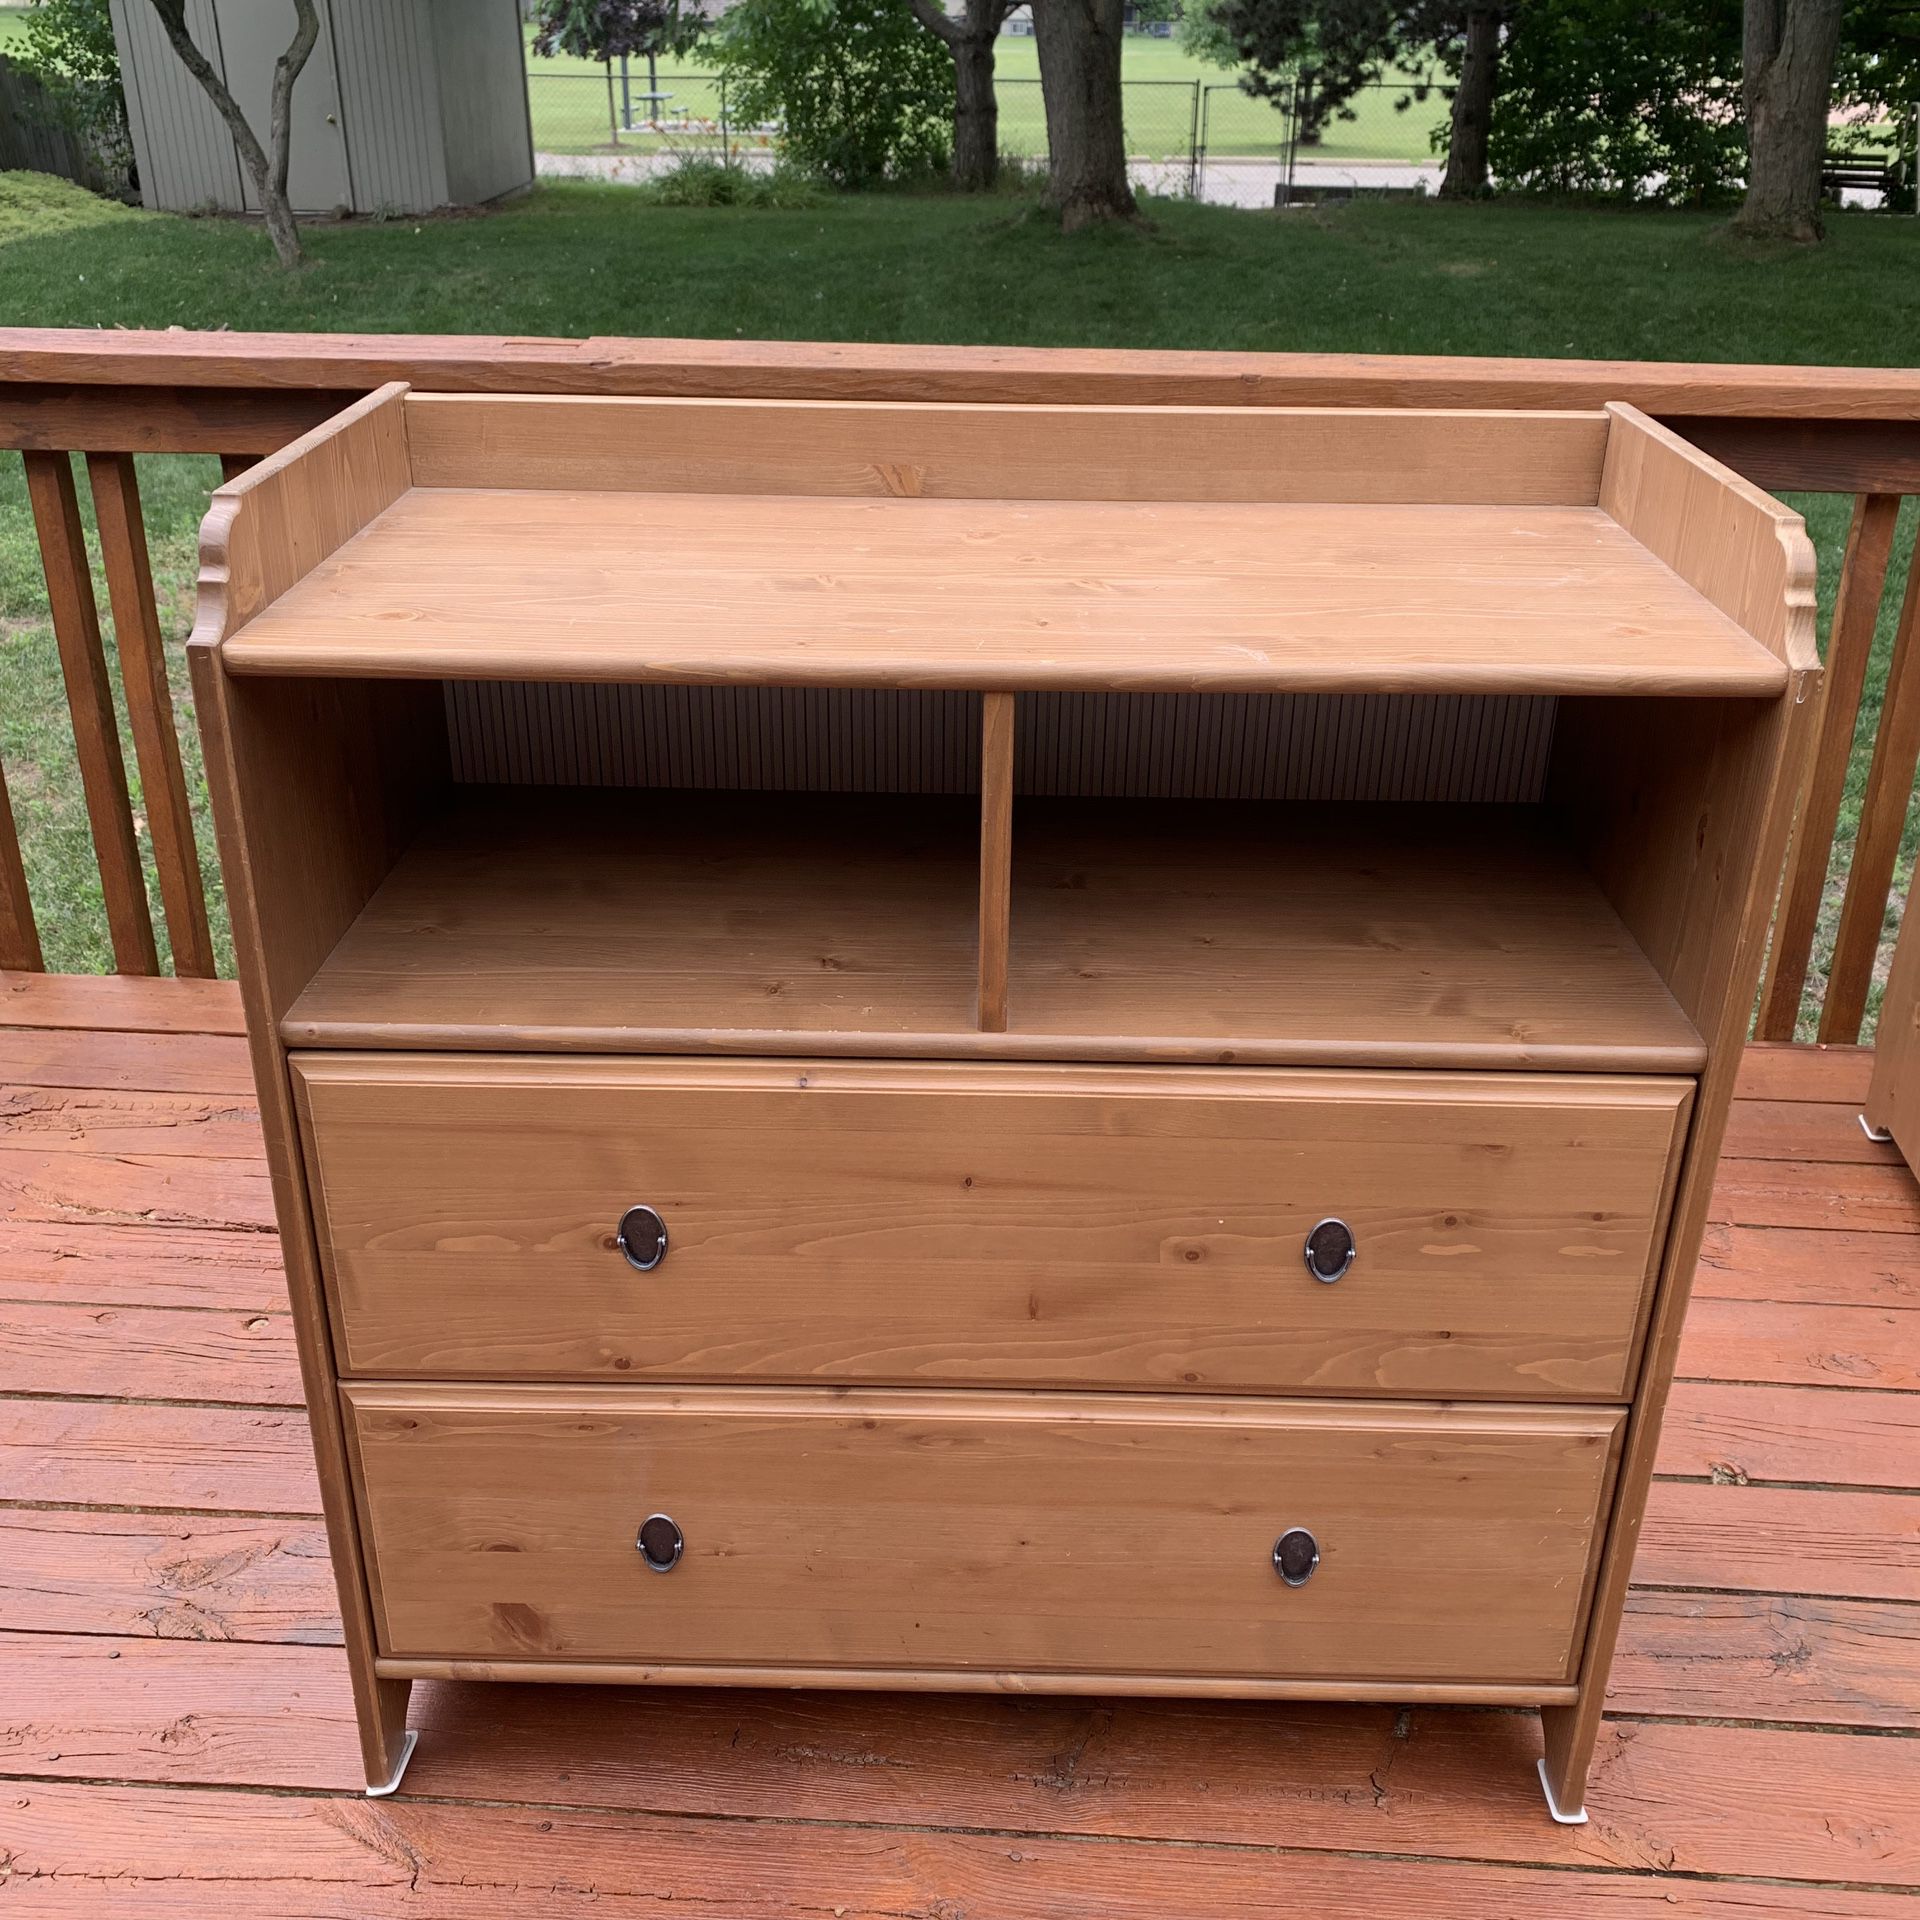 IKEA Baby Changing Table/Kid Dresser - 1 day left $30!!